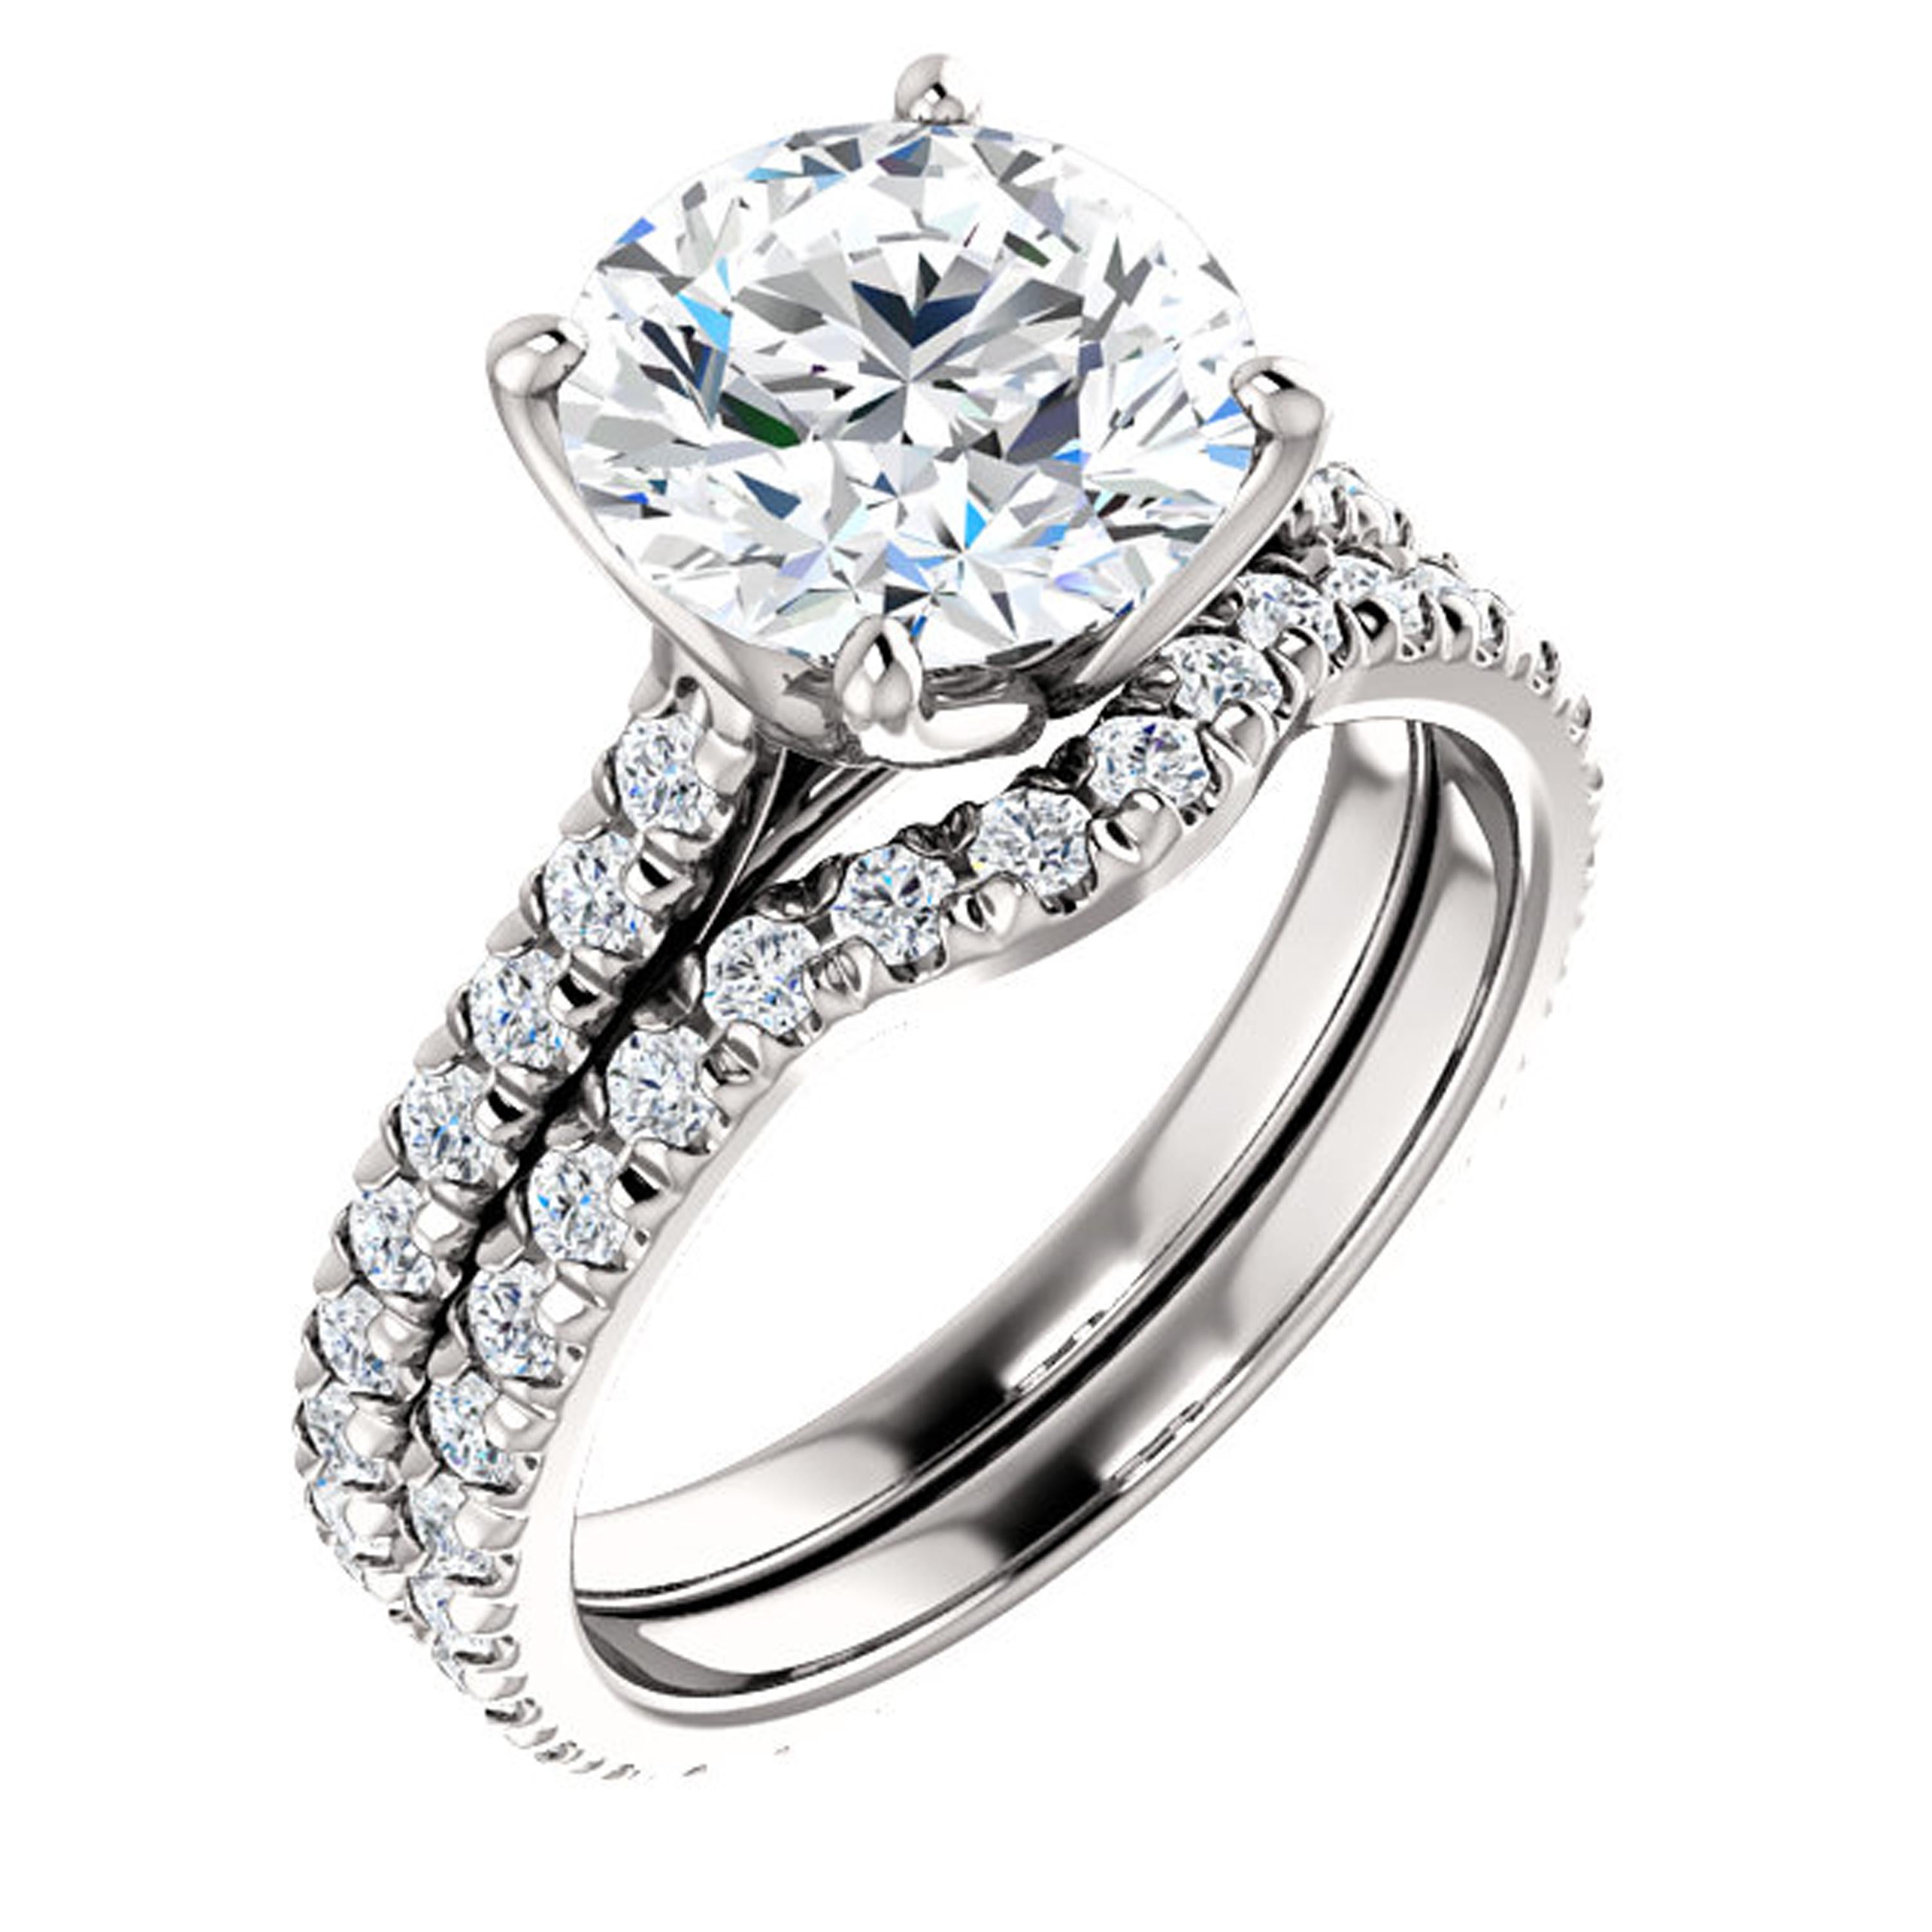 Showcasing an eternity style, this Valorenna engagement ring is adorned with french pave diamonds lining up the shank. Shimmering with beauty, the round GIA certified center stone is held gloriously in the center.

Matching band sold